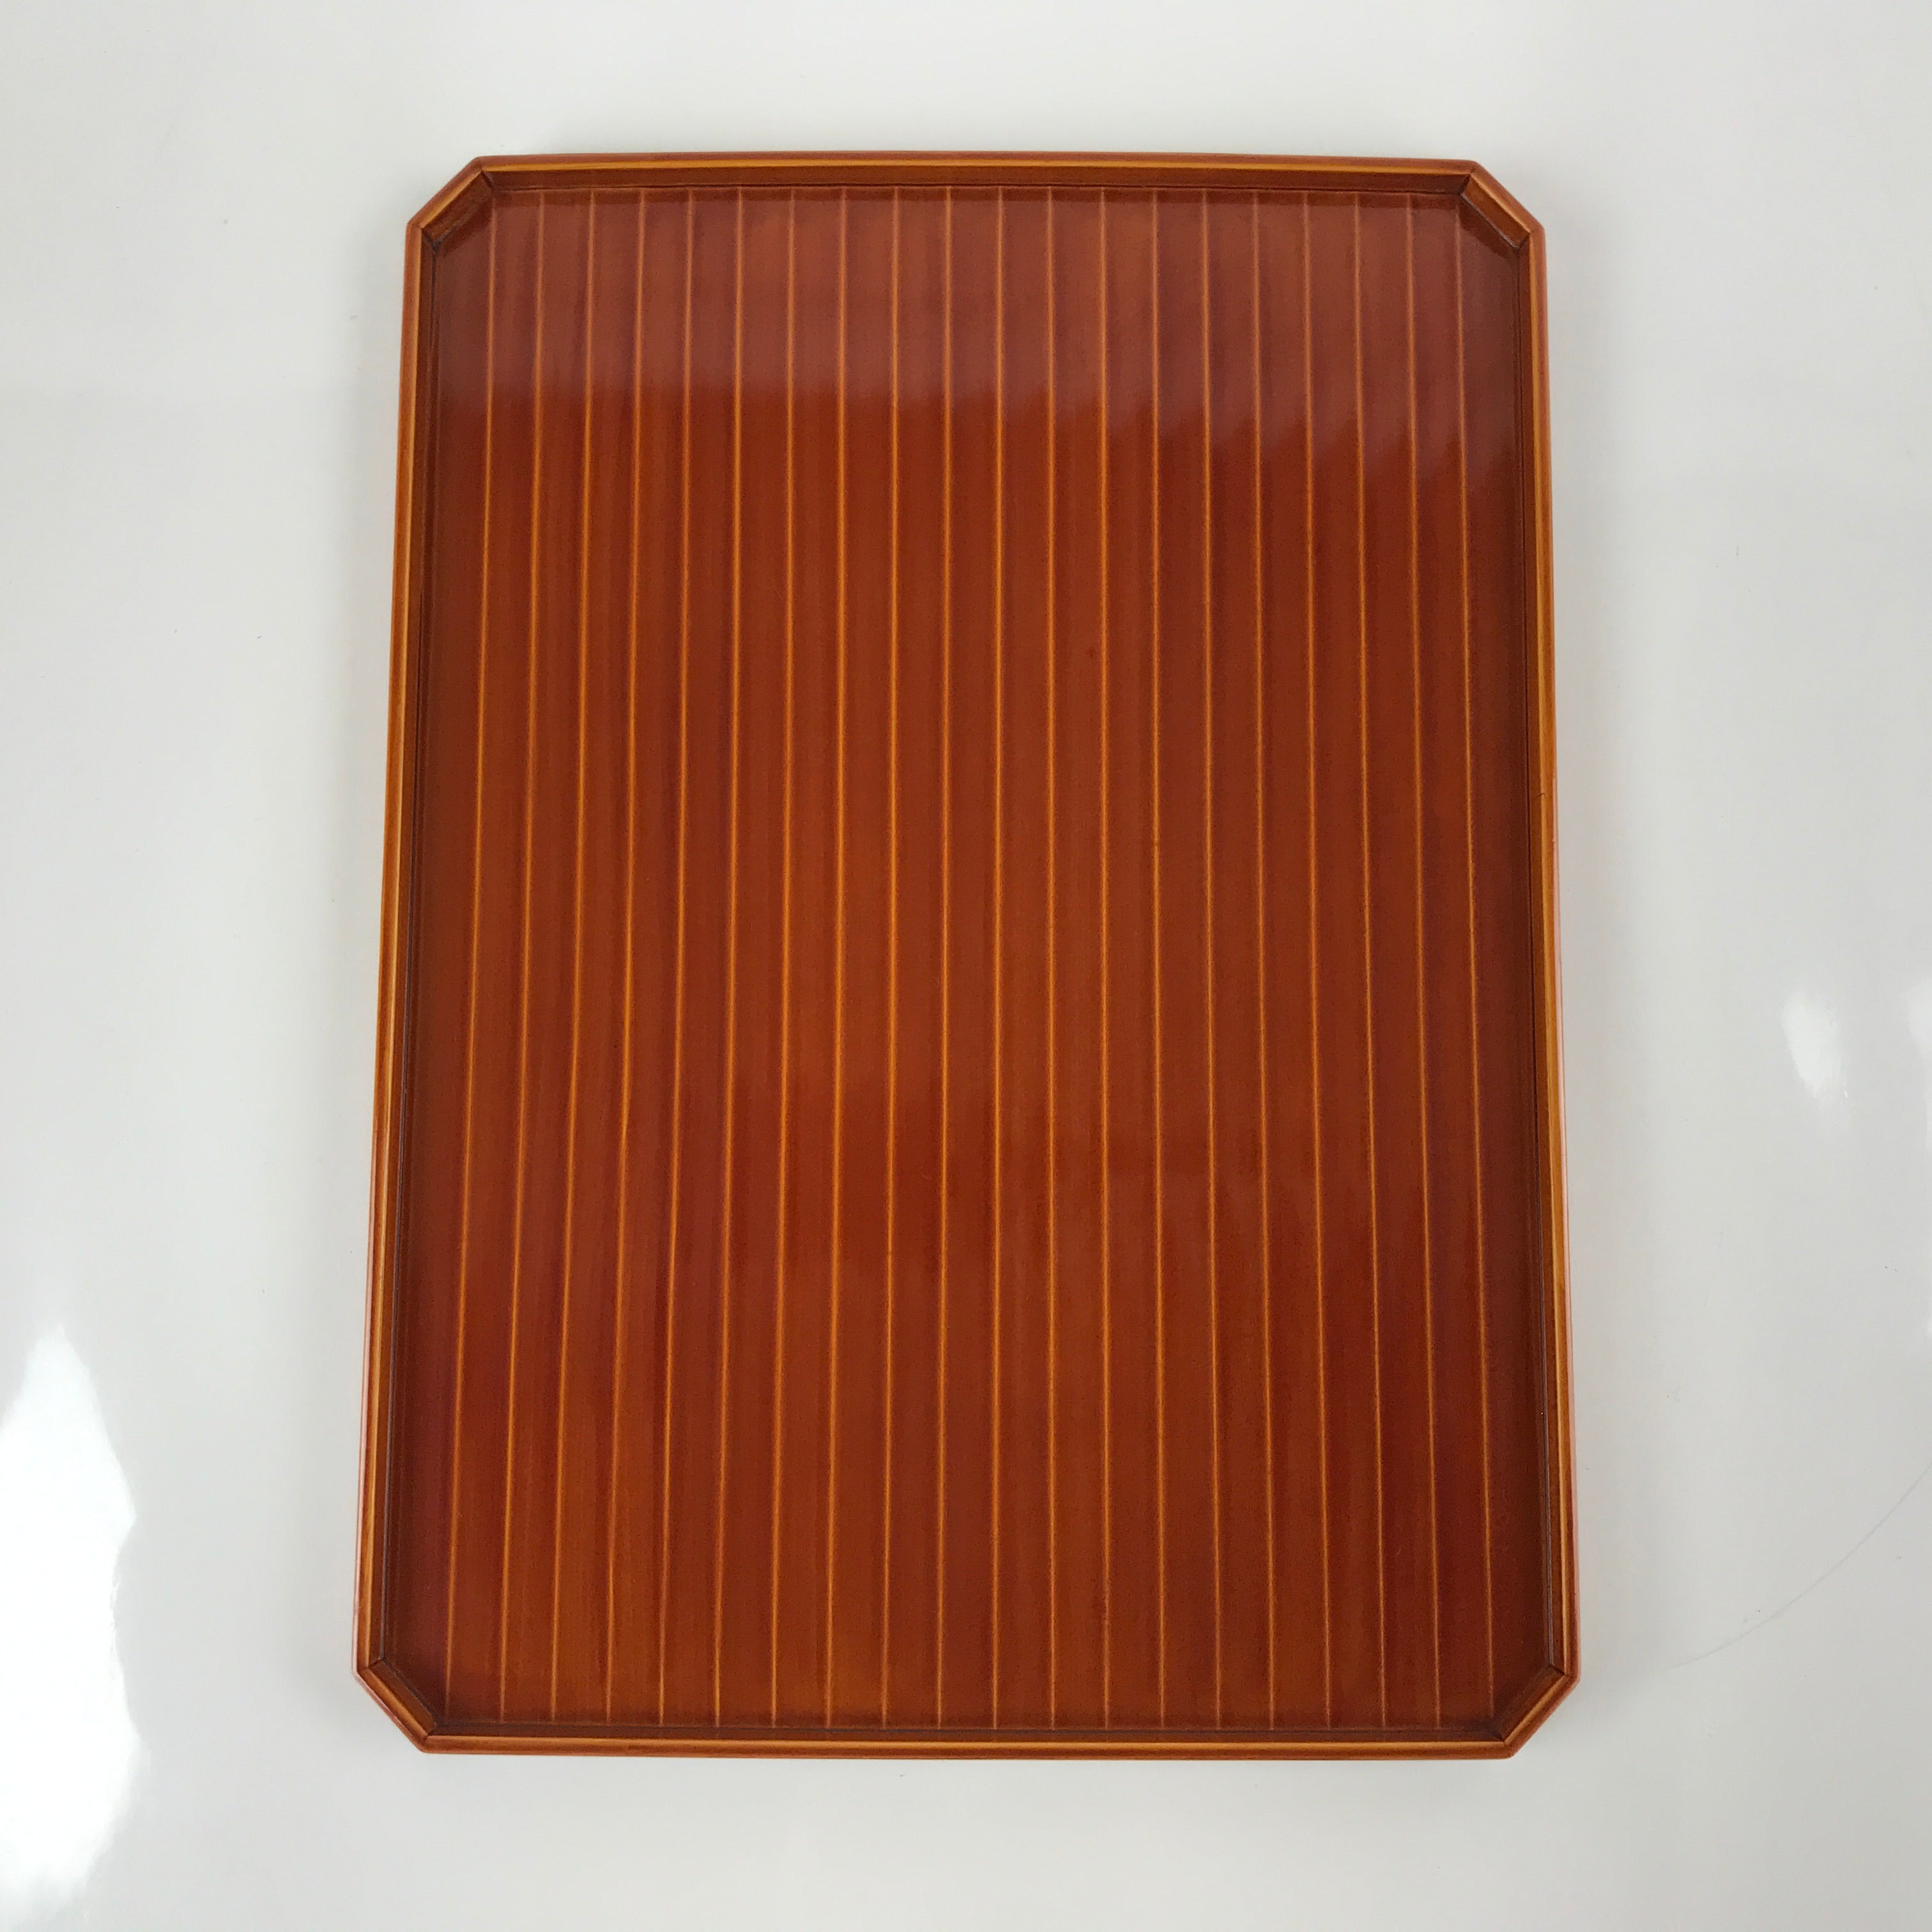 Japanese Lacquered Wood Serving Tray Vtg Hida Shunkei Obon Rectangle Brown L174